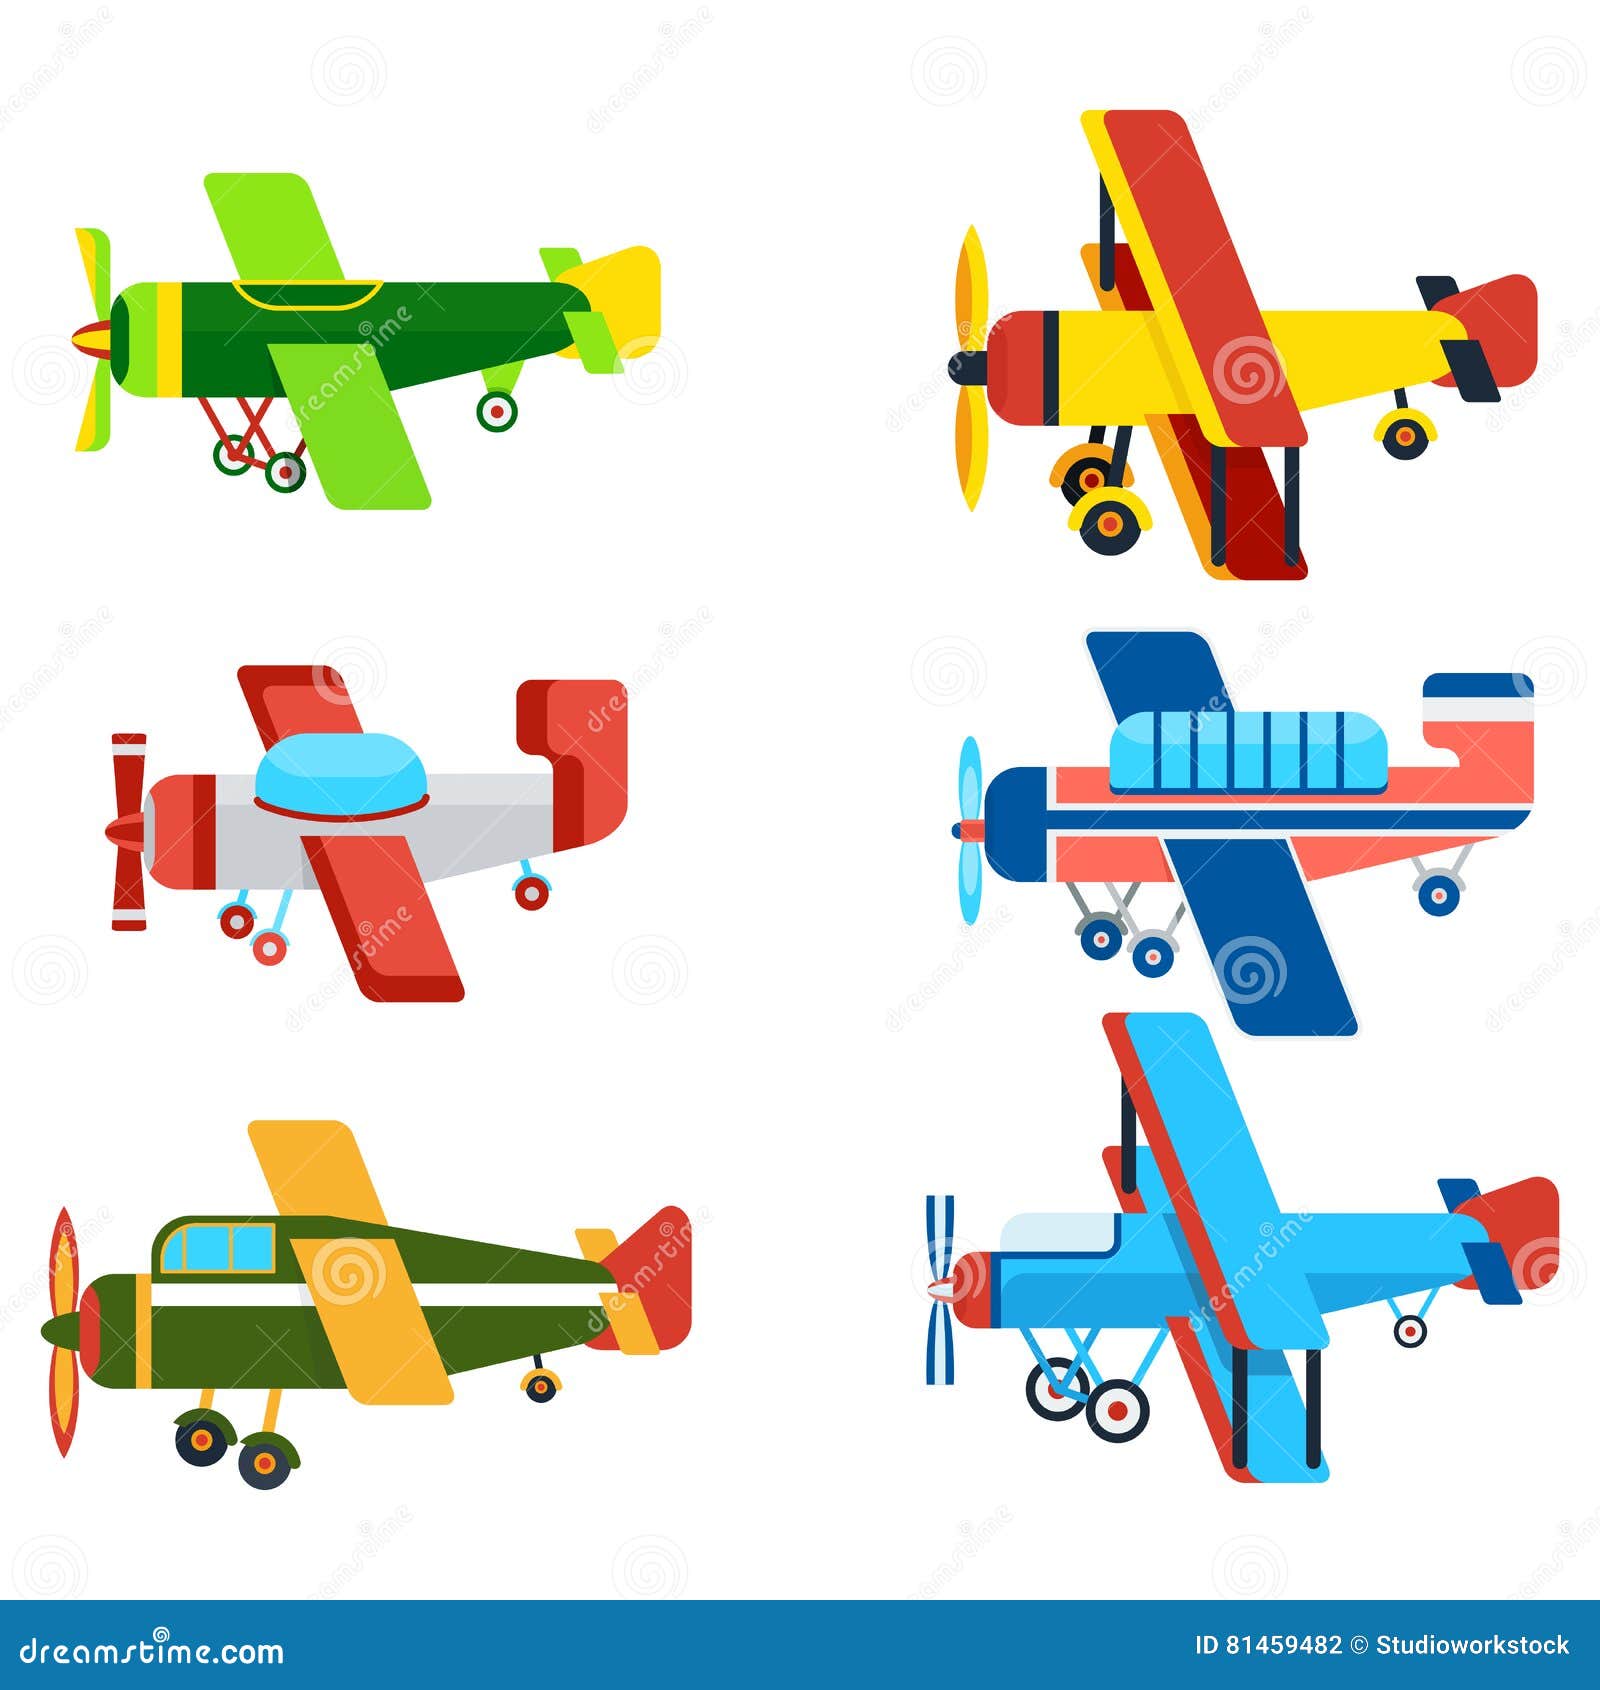 vintage airplanes cartoon models collection